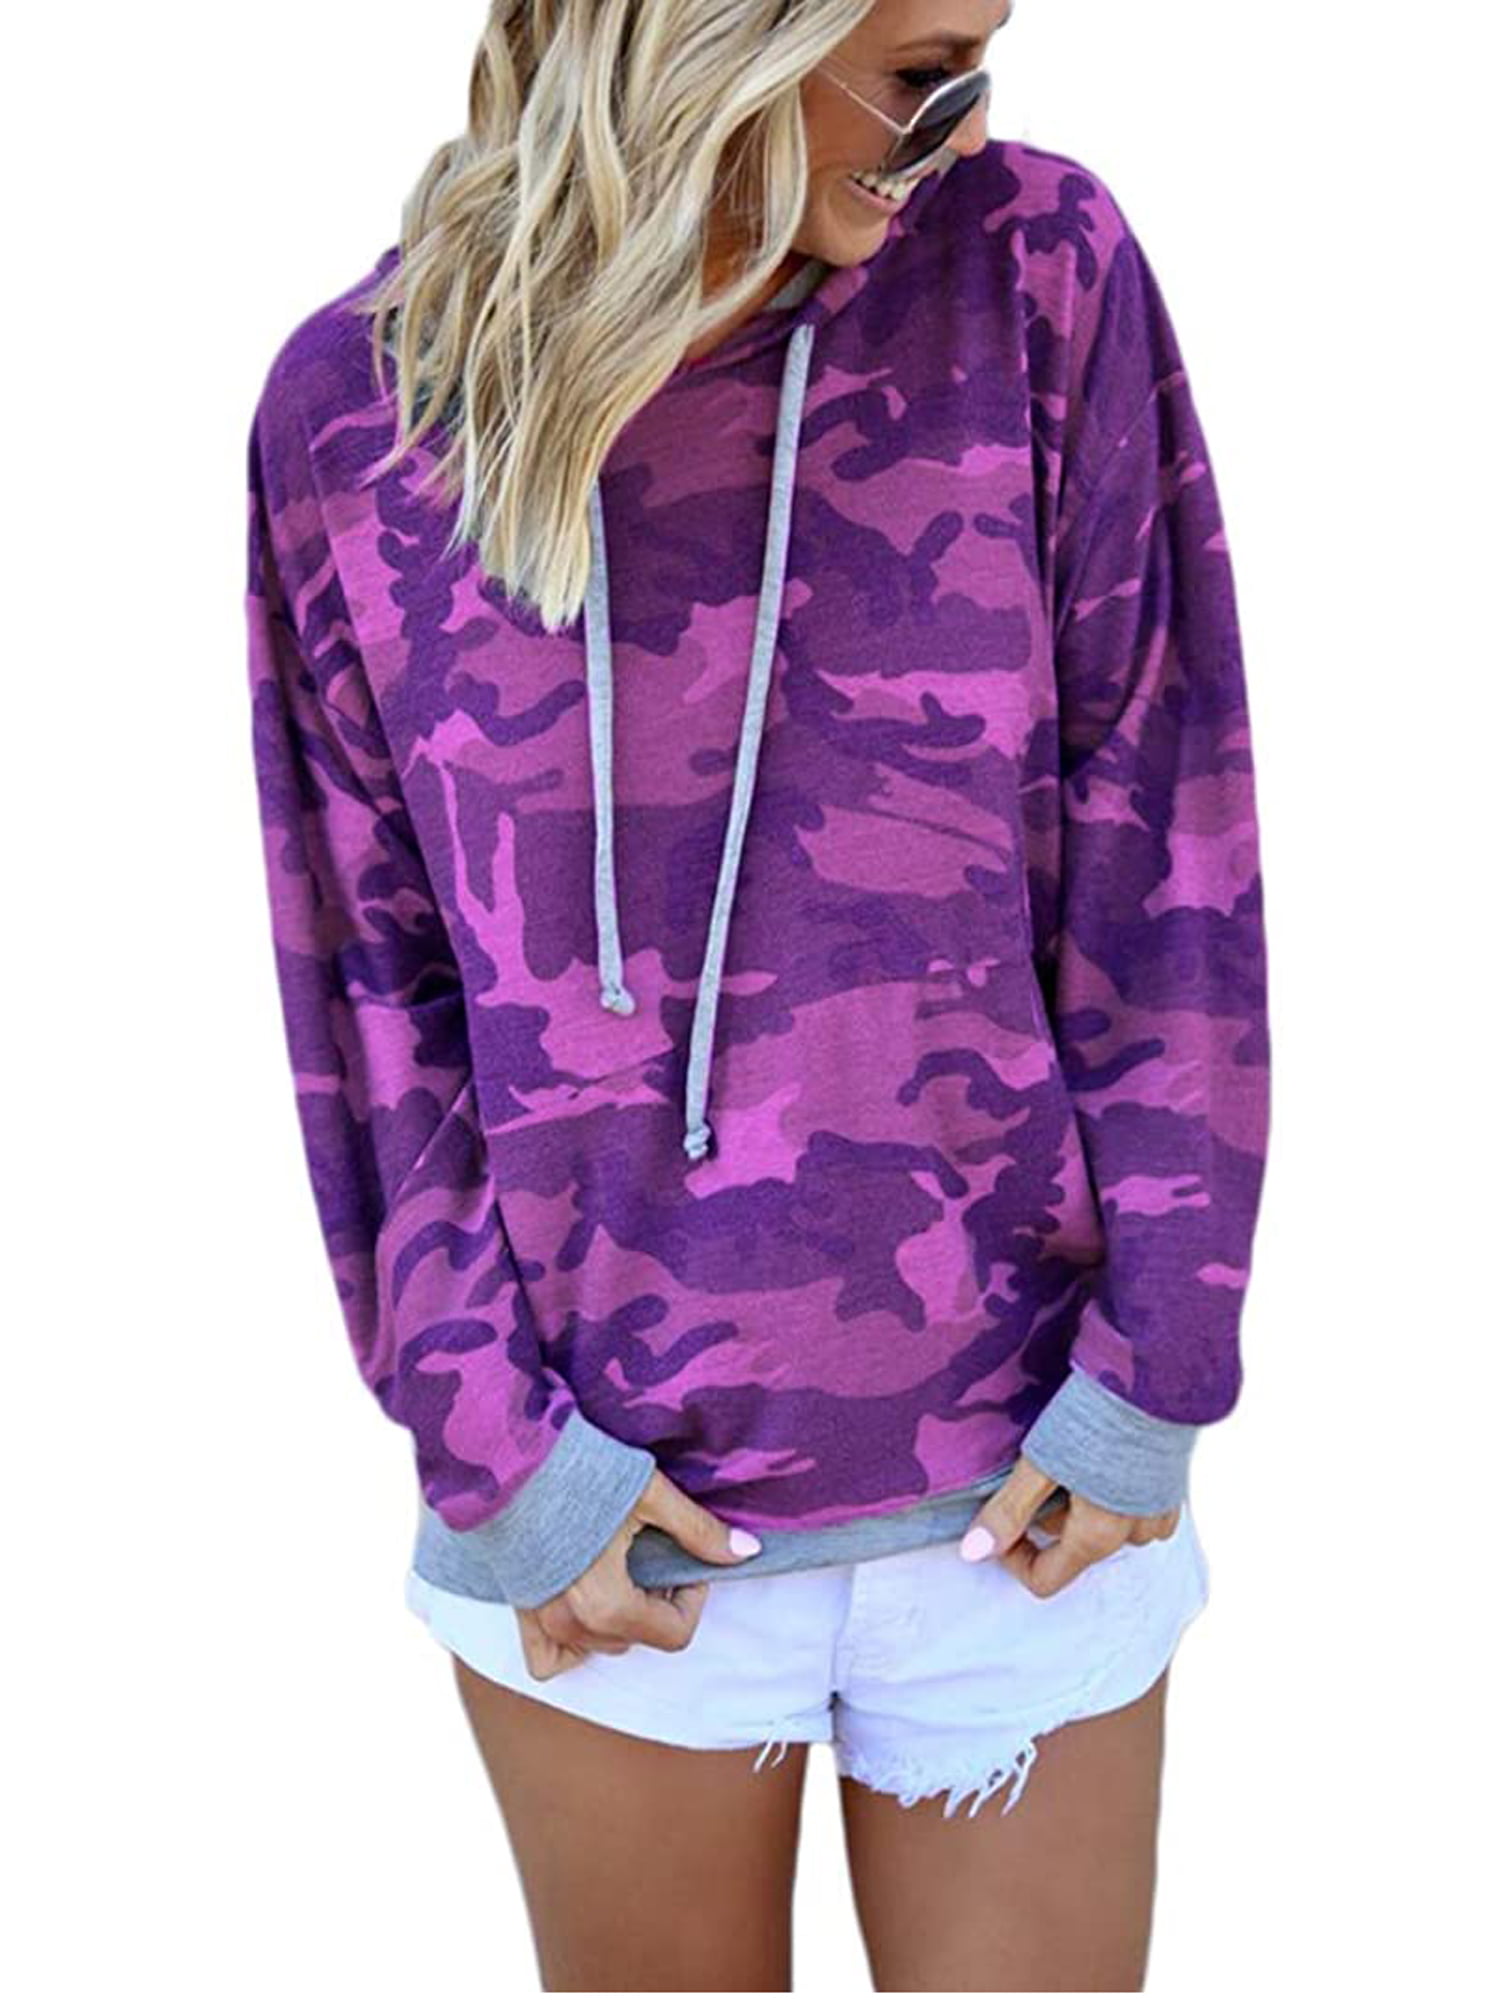 yiyioi Women Casual Hooded Neck Long Sleeve Camouflage Print Pullover Hoodies Hoodies 